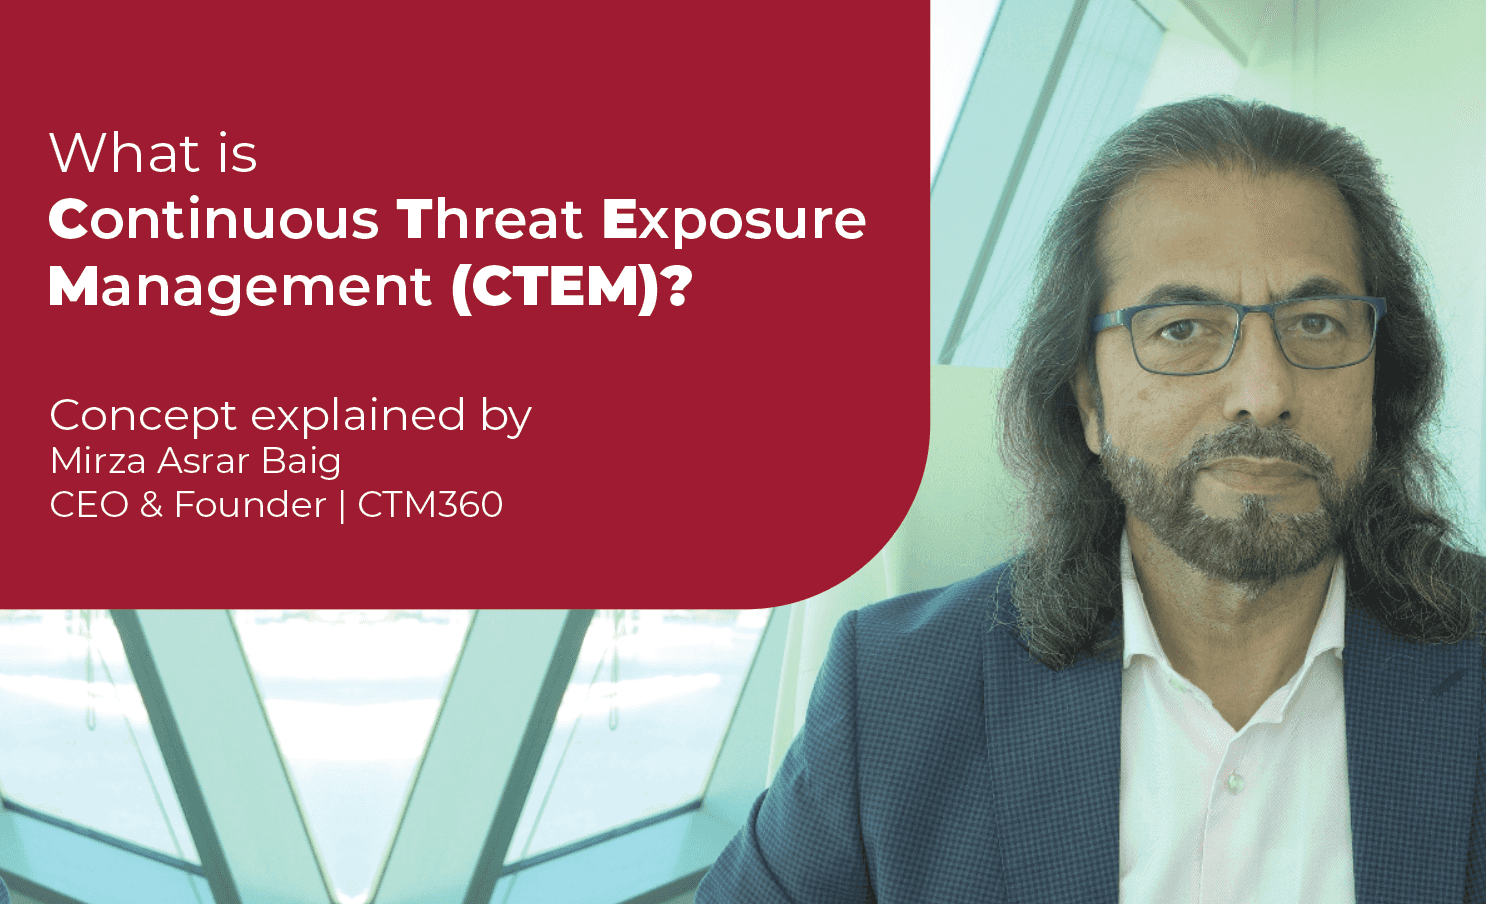 What is Continuous Threat Exposure Management (CTEM)? The concept explained by Mirza Asrar Baig.